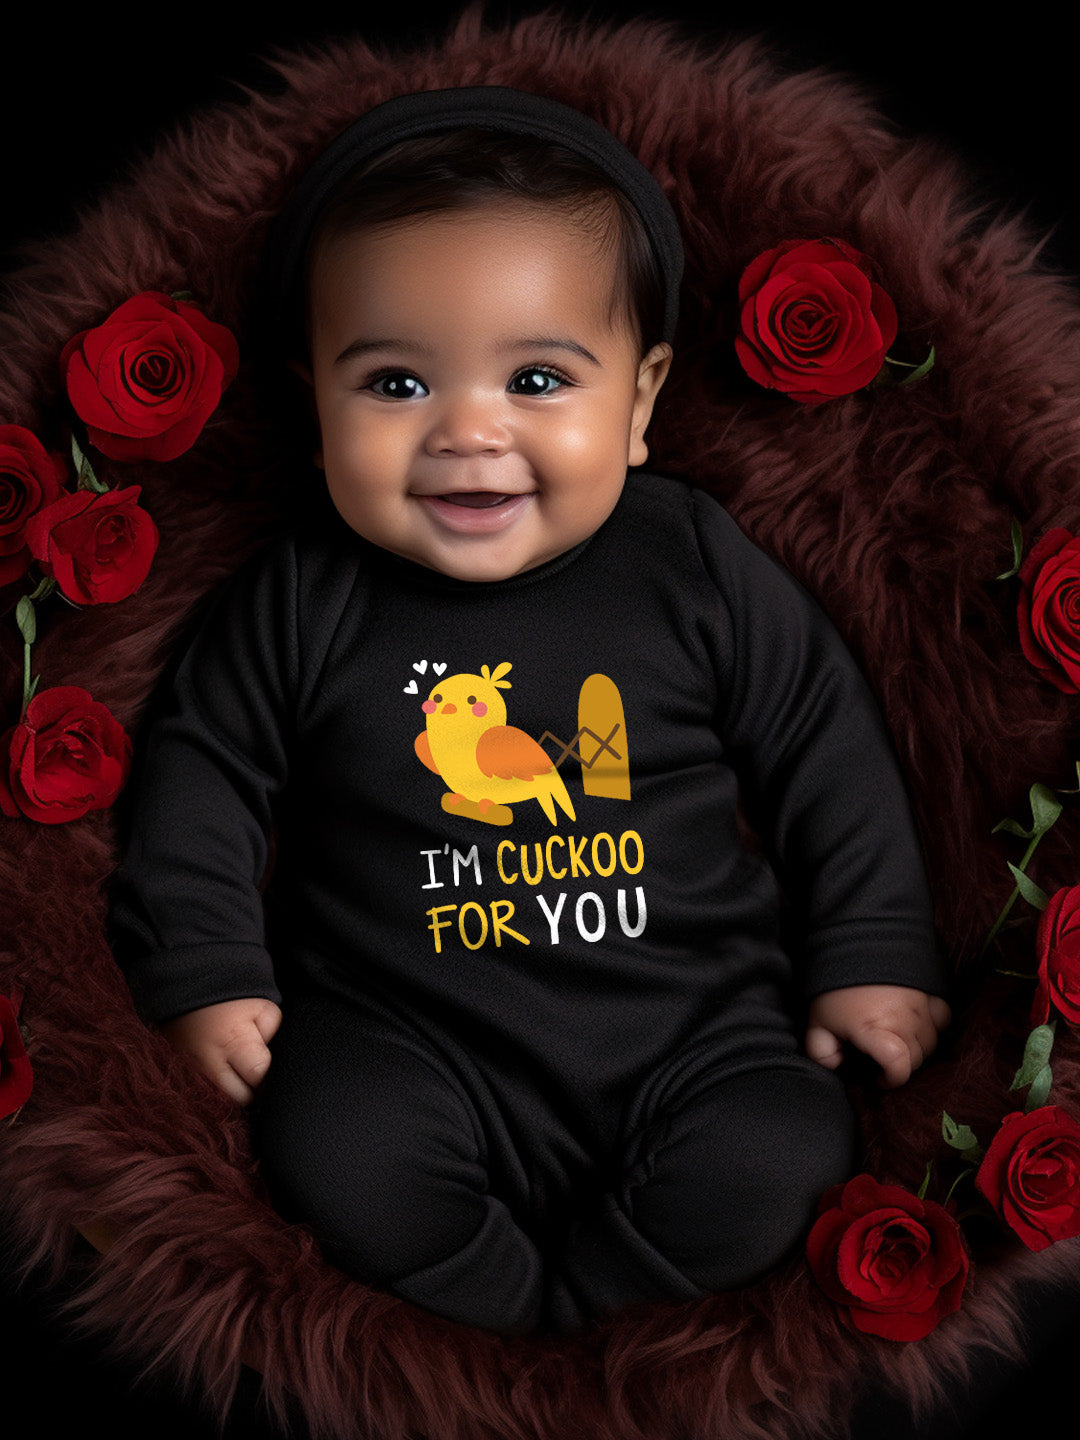 I'm Cuckoo For You Baby Romper | Onesies